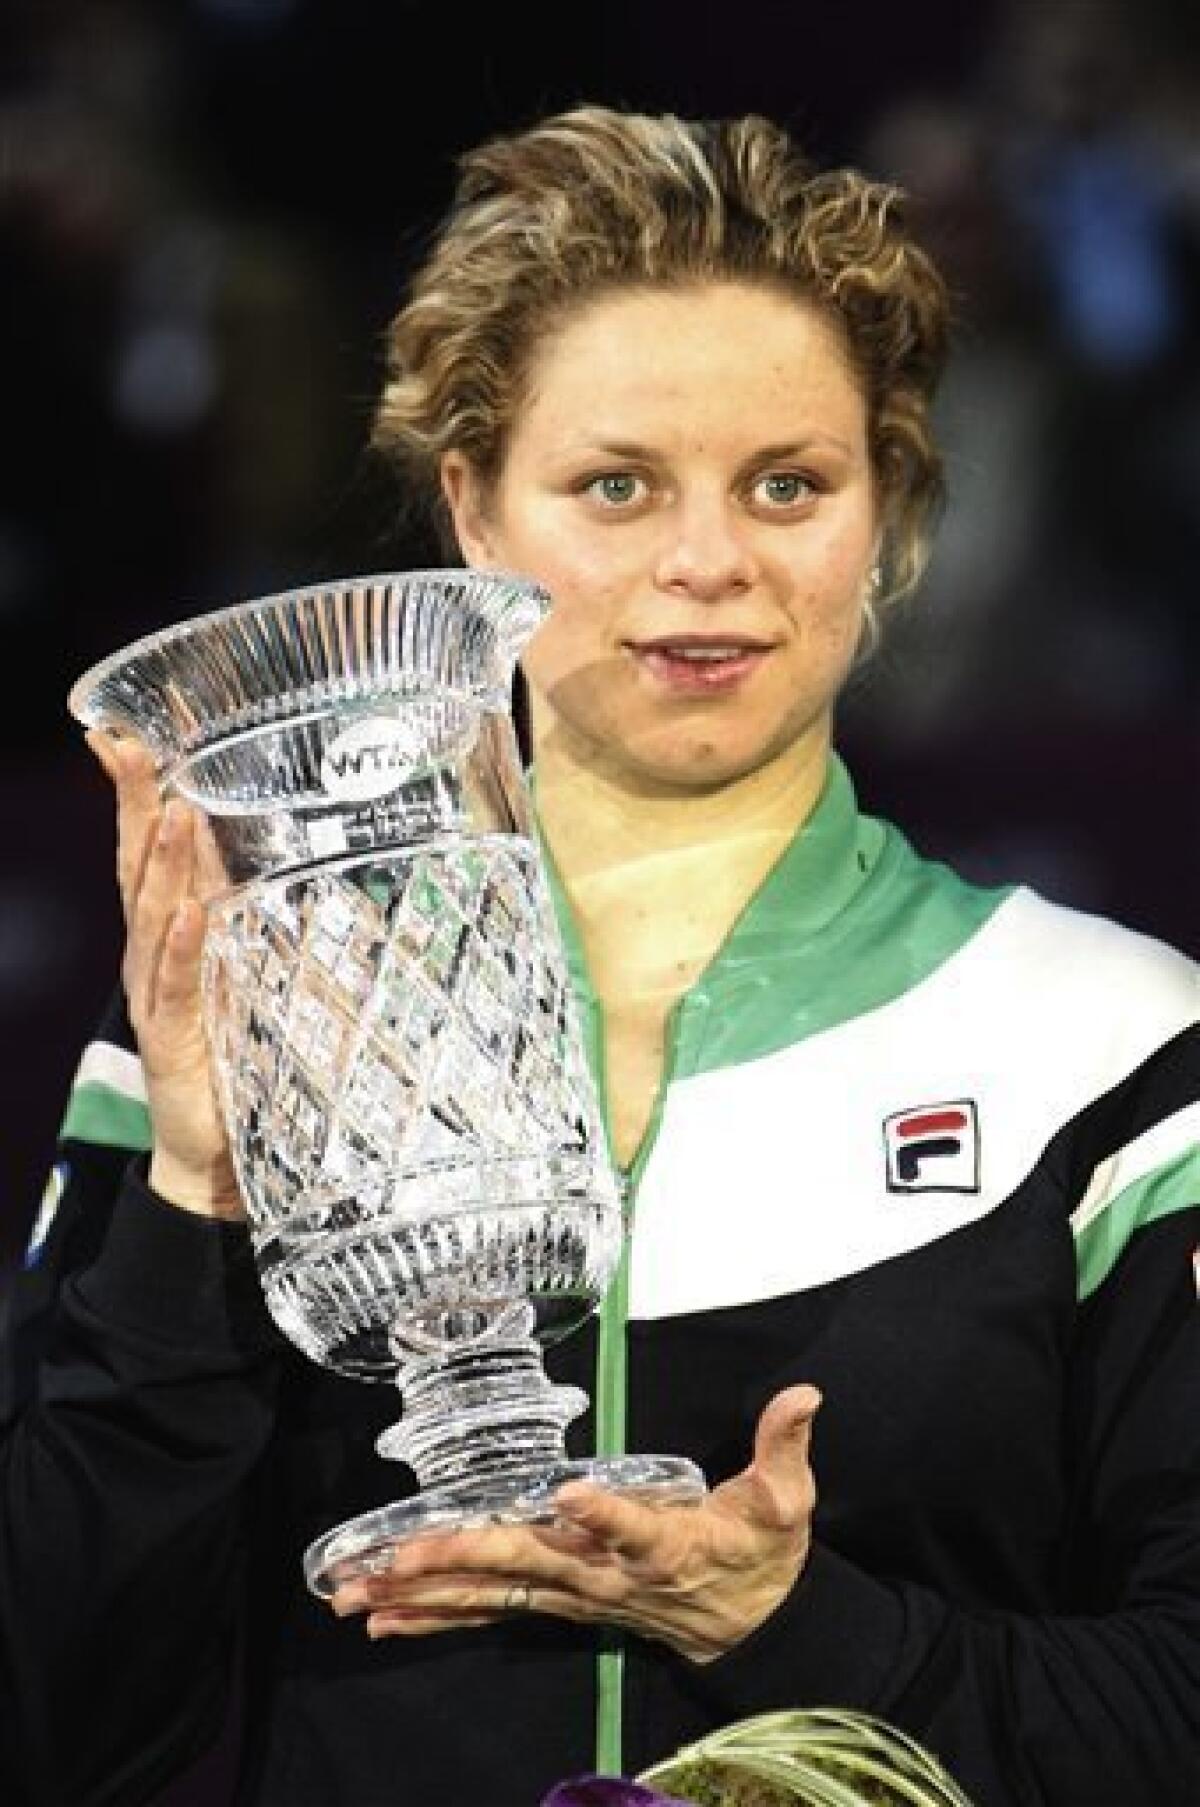 Belgium's Kim Clijsters holds the trophy as she celebrates her win against Australia's Jelena Dokic during the Paris Open tennis tournament at Coubertin stadium in Paris, Friday, Feb. 11, 2011. Clijsters of Belgium secured the No. 1 ranking by defeating Jelena Dokic of Australia 6-3, 6-0 on Friday to reach the semifinals of the Open Gaz de France. (AP Photo/Jacques Brinon)